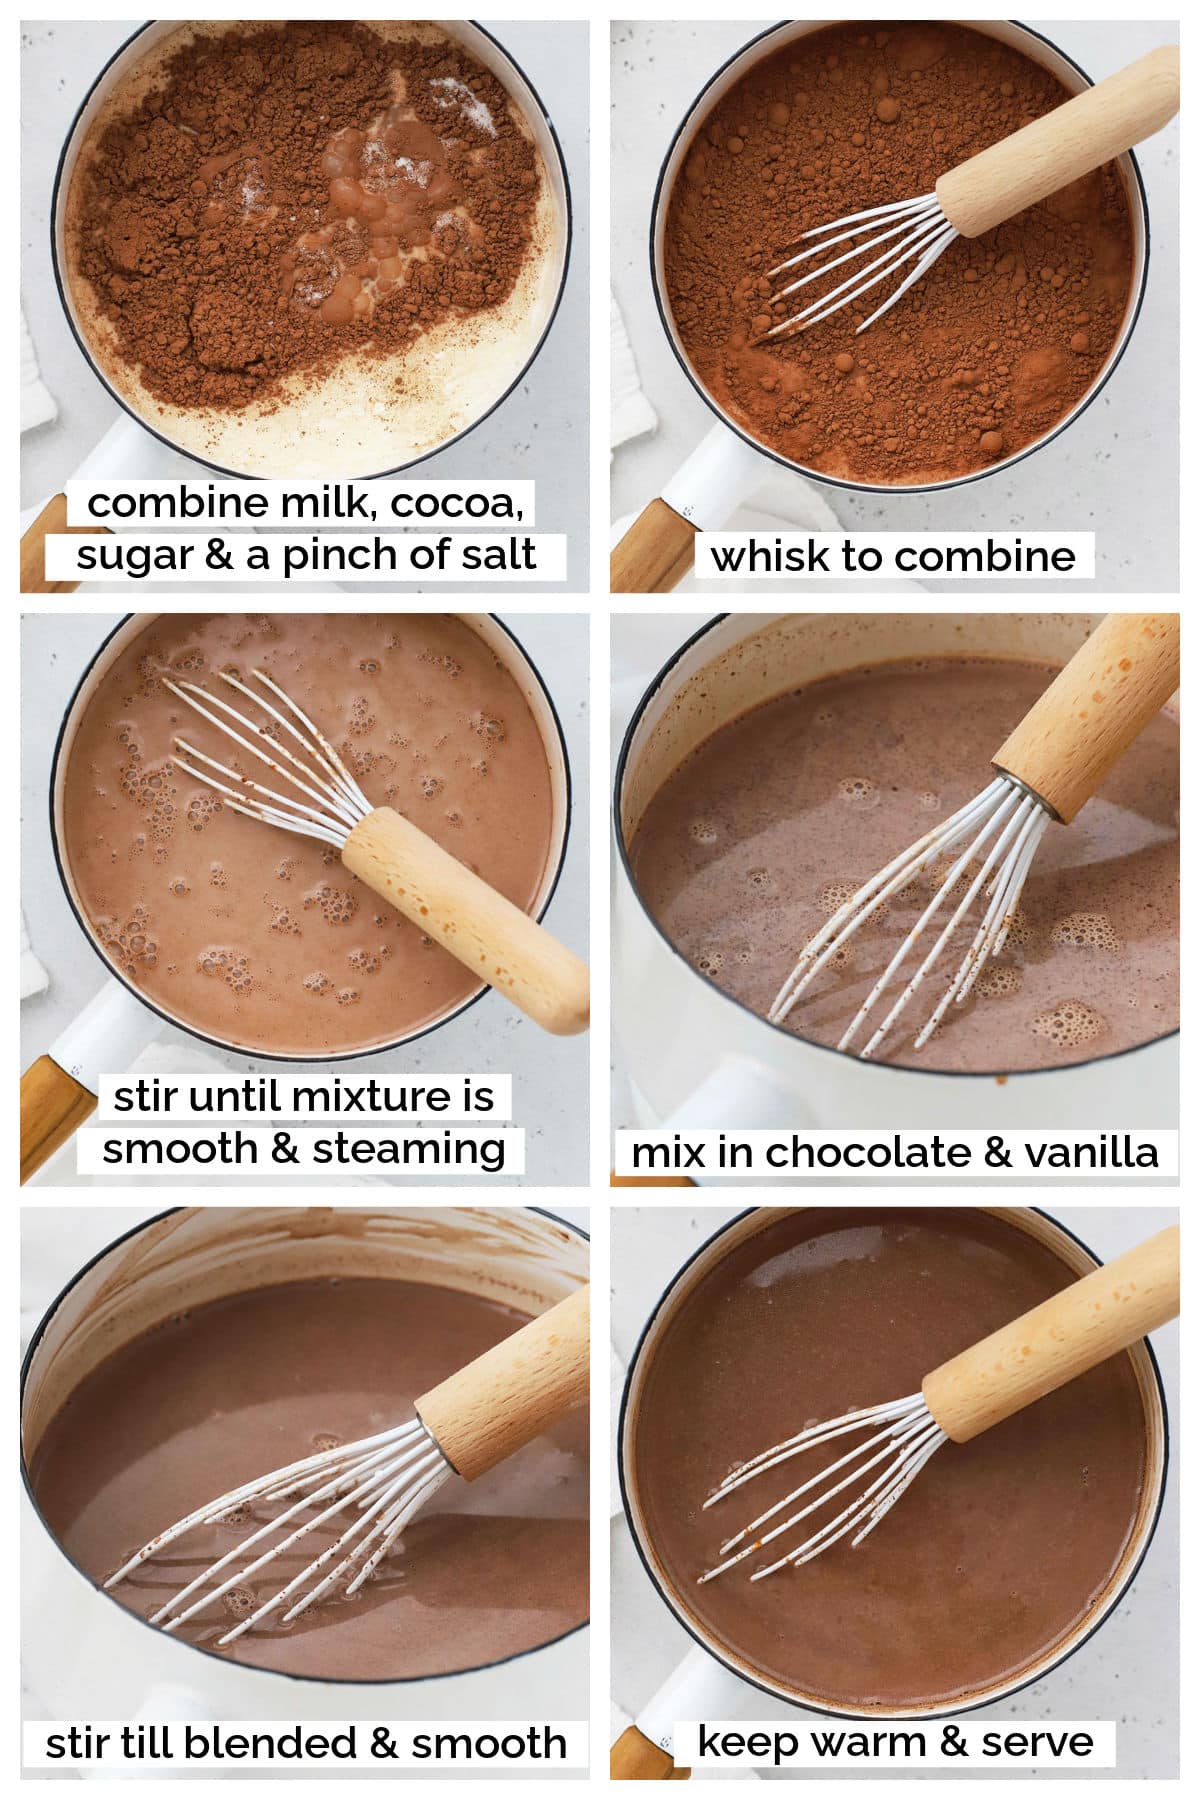 making homemade gluten-free hot chocolate step by step